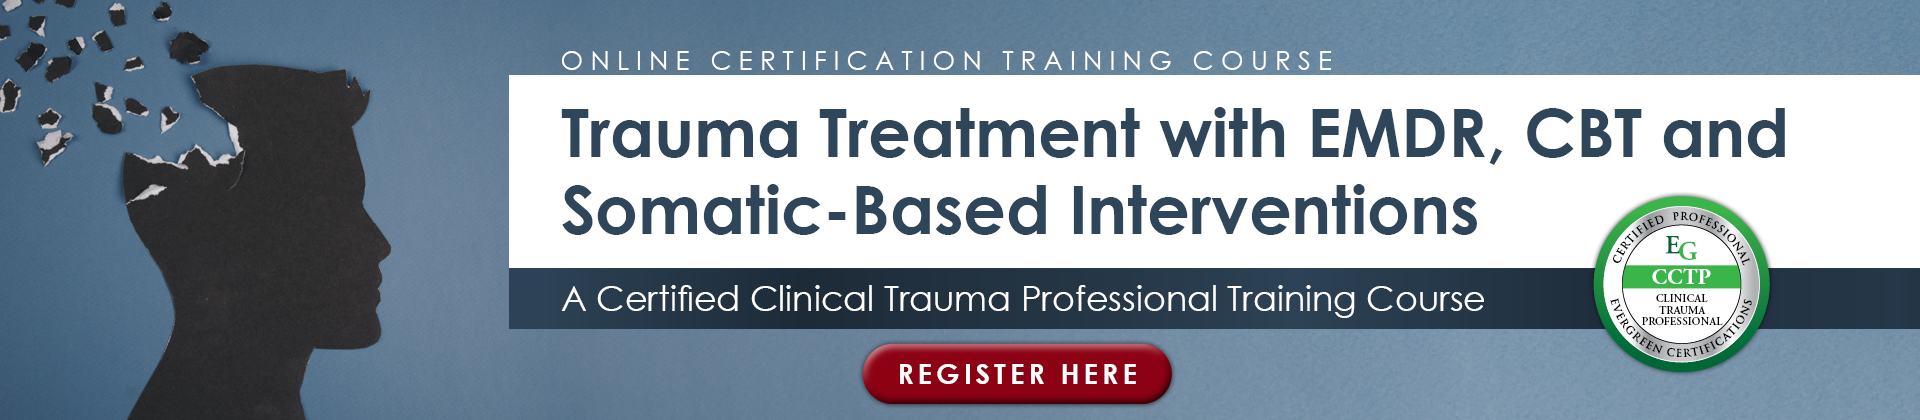 Trauma Treatment with EMDR, CBT and Somatic-Based Interventions: A Certified Clinical Trauma Professional Training Course